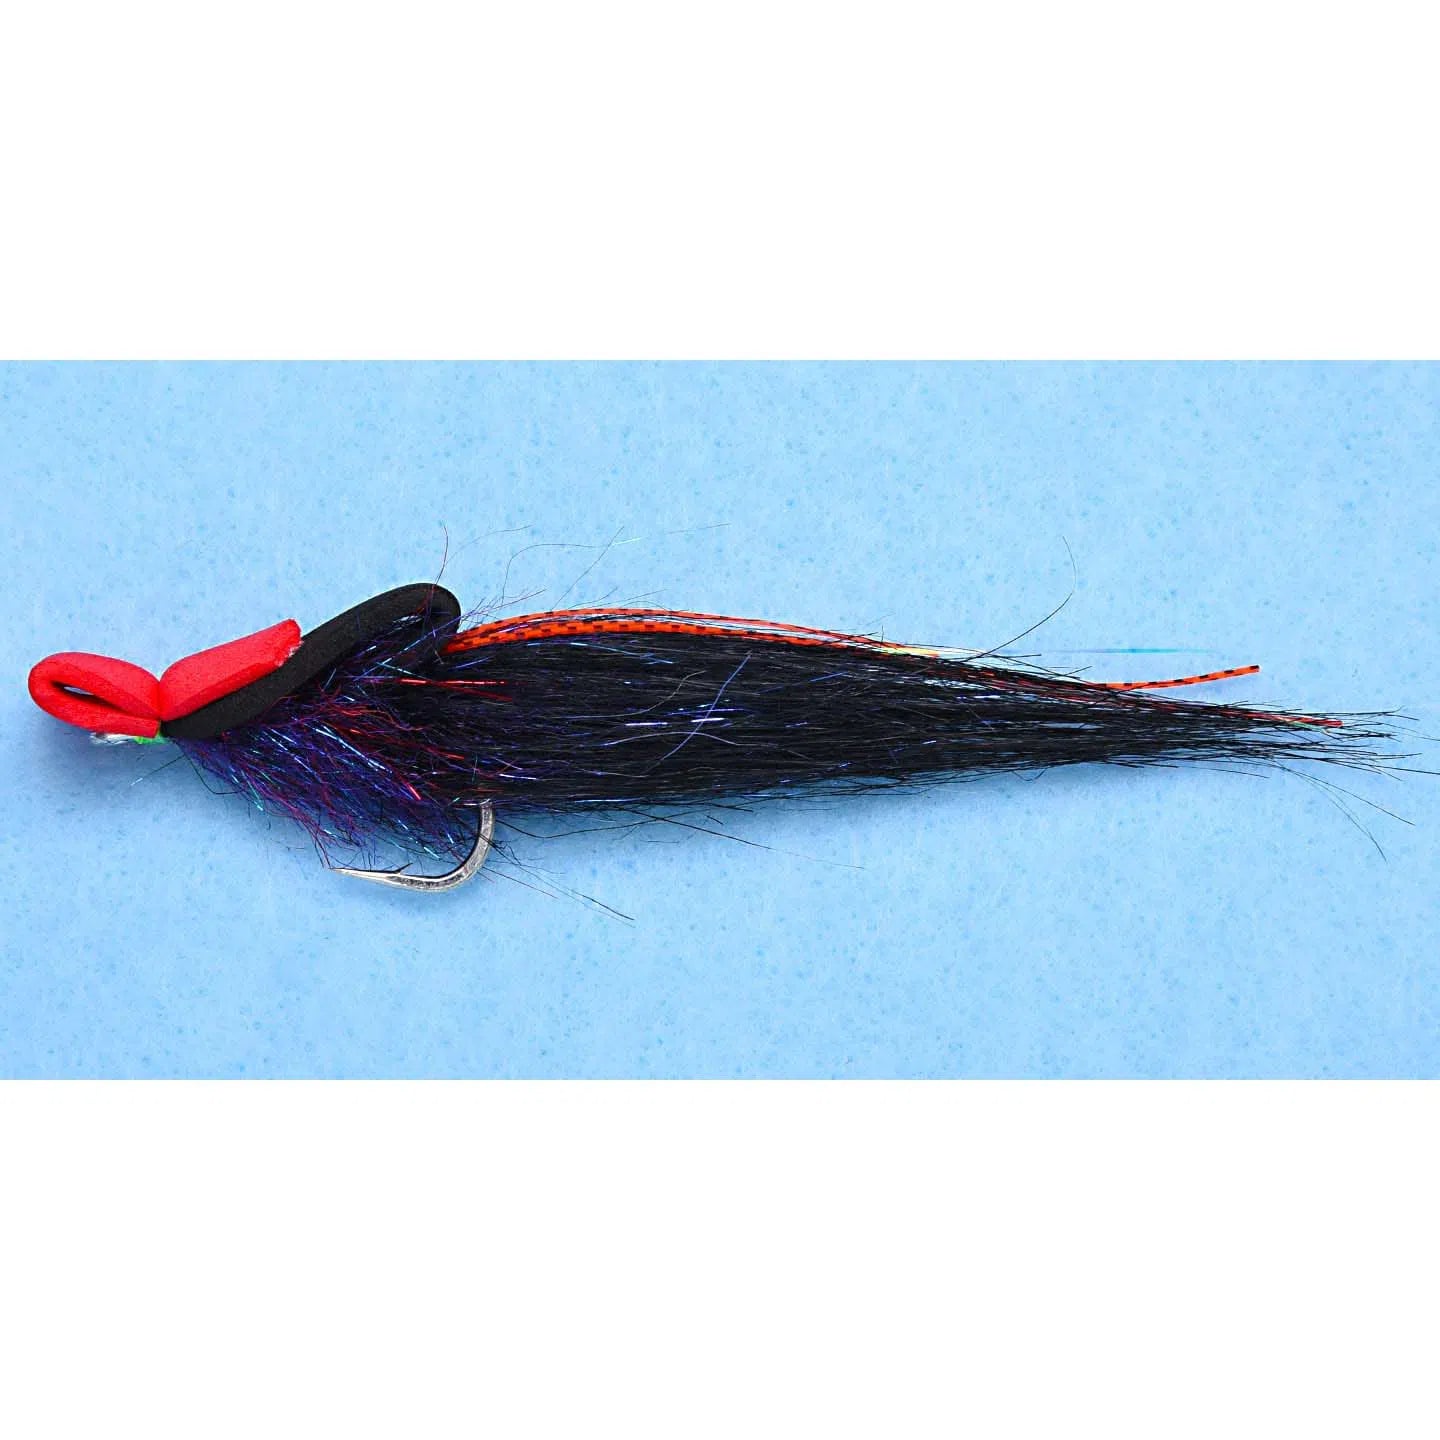 Enrico Puglisi Top Water Shrimp Fly-Lure - Fly-Enrico Puglisi-Black/Purple-Size #2/0-Fishing Station